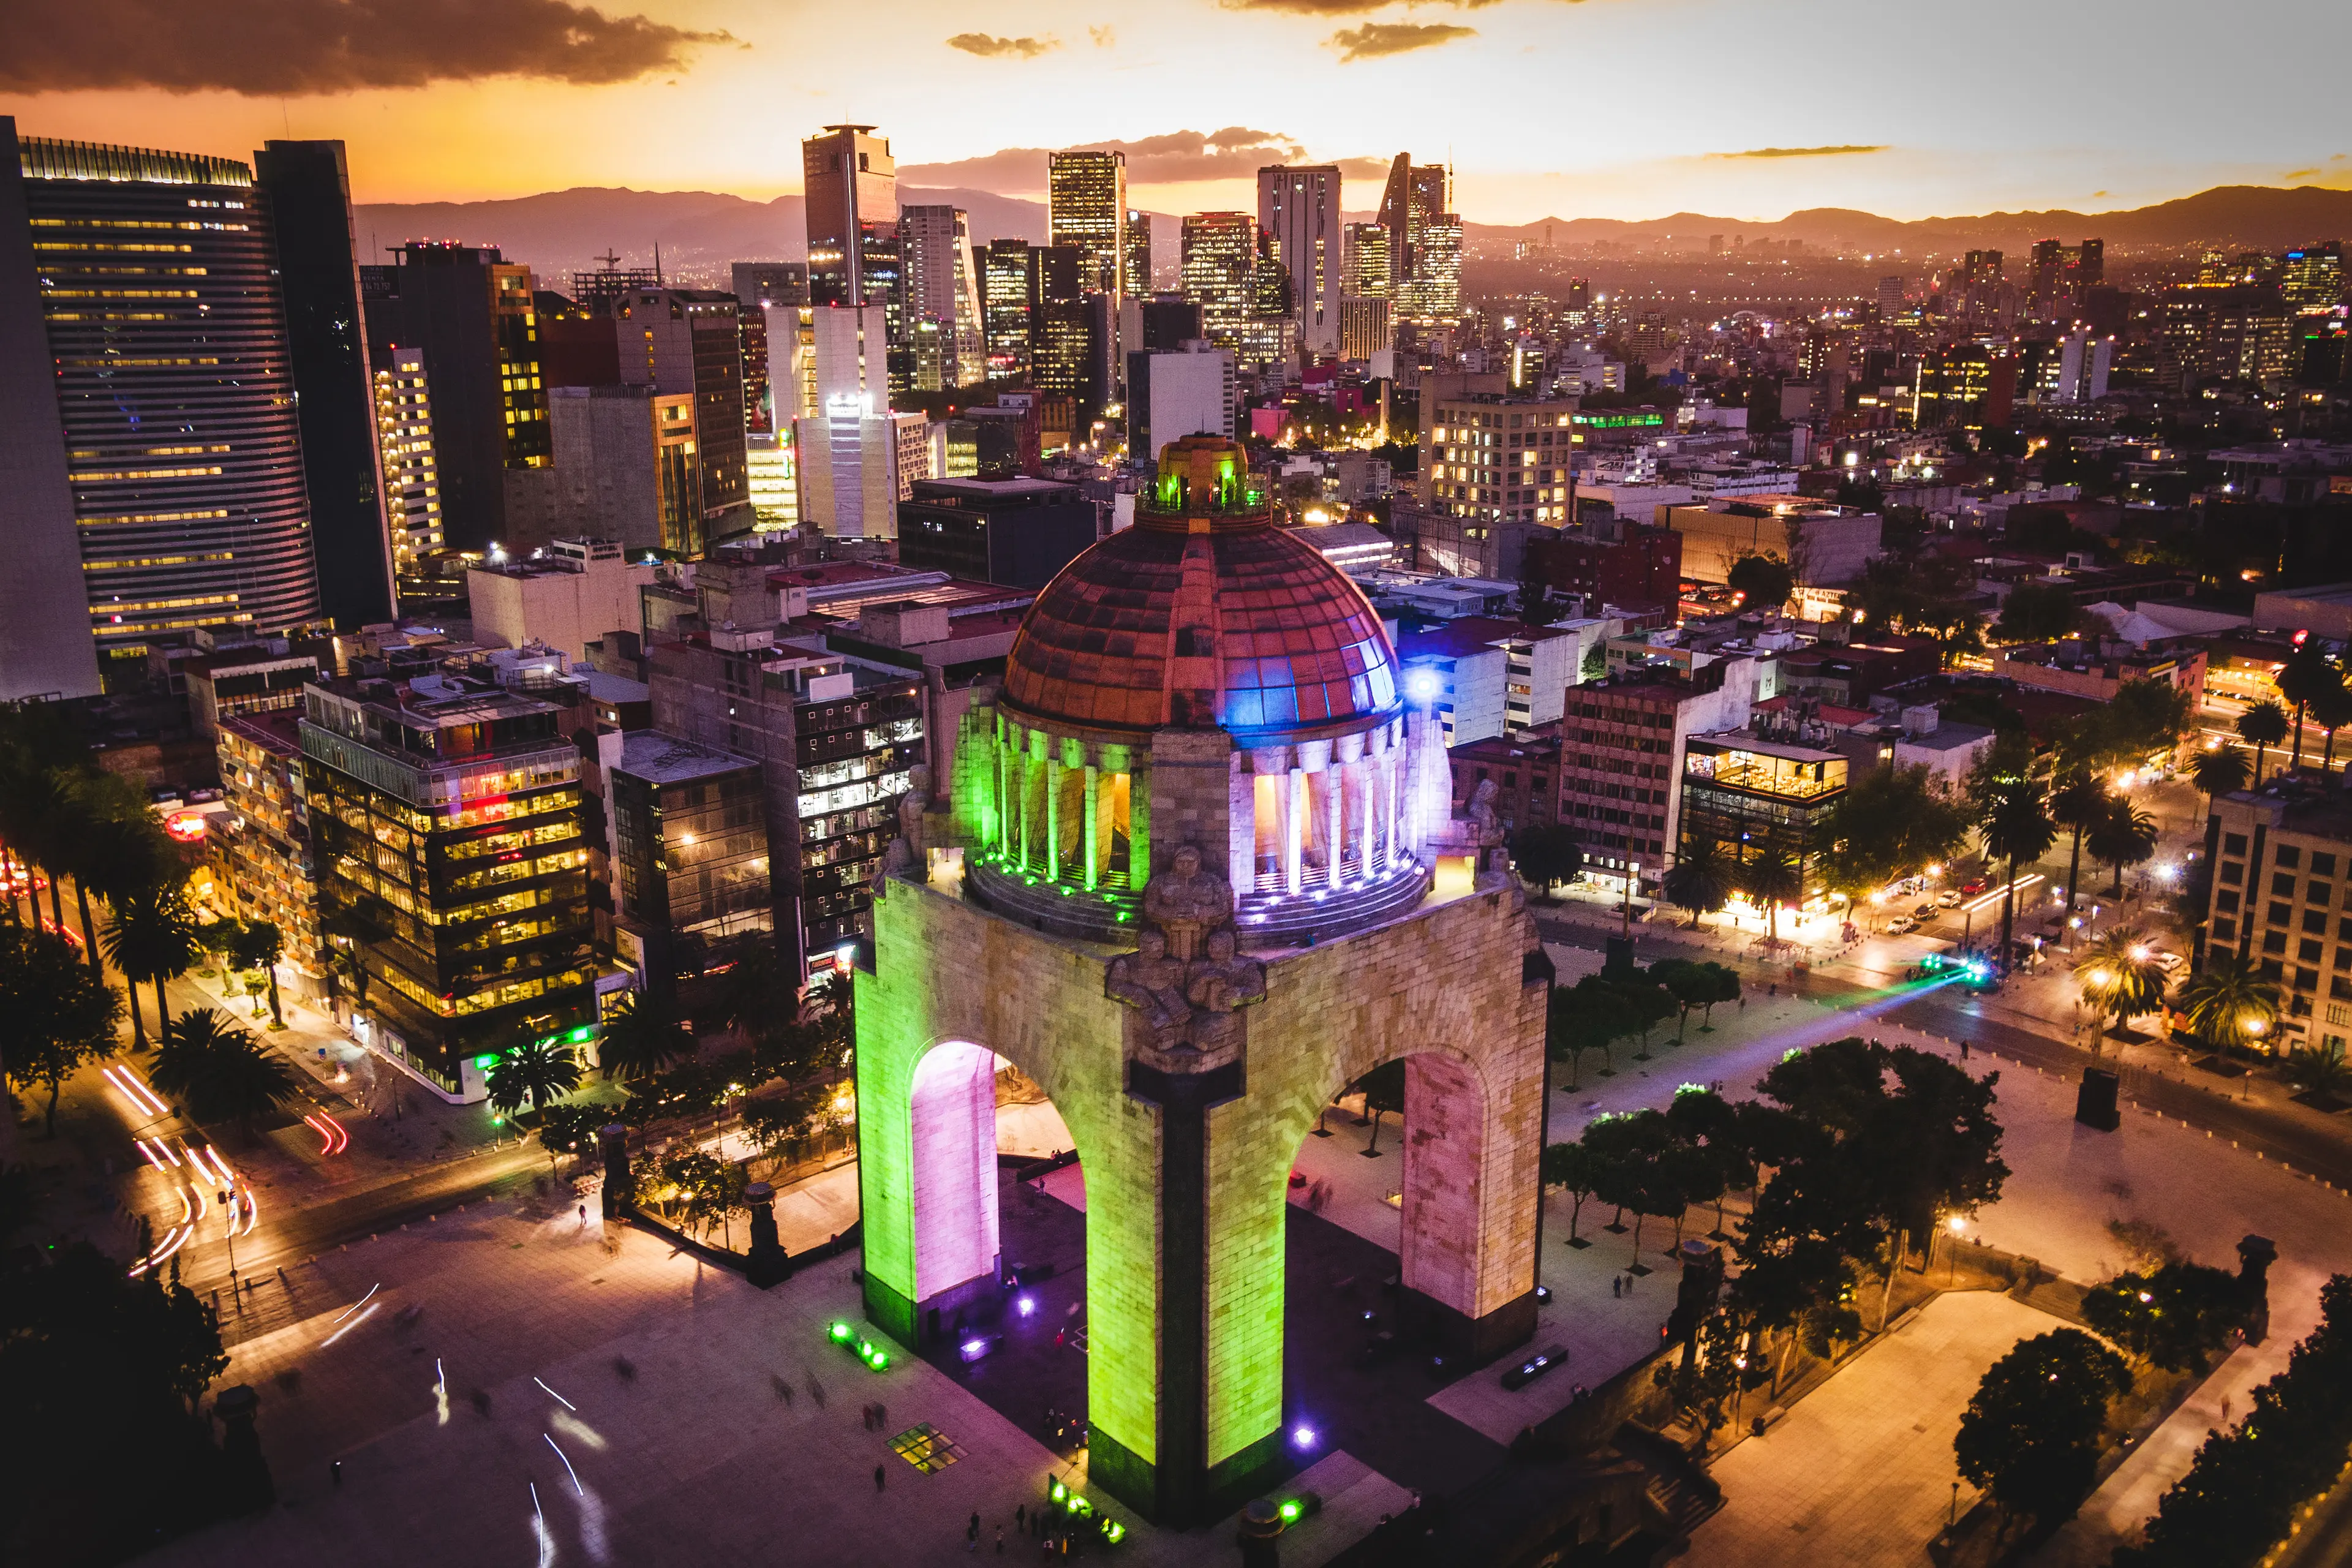 2-Day Exciting Itinerary to Explore Mexico City